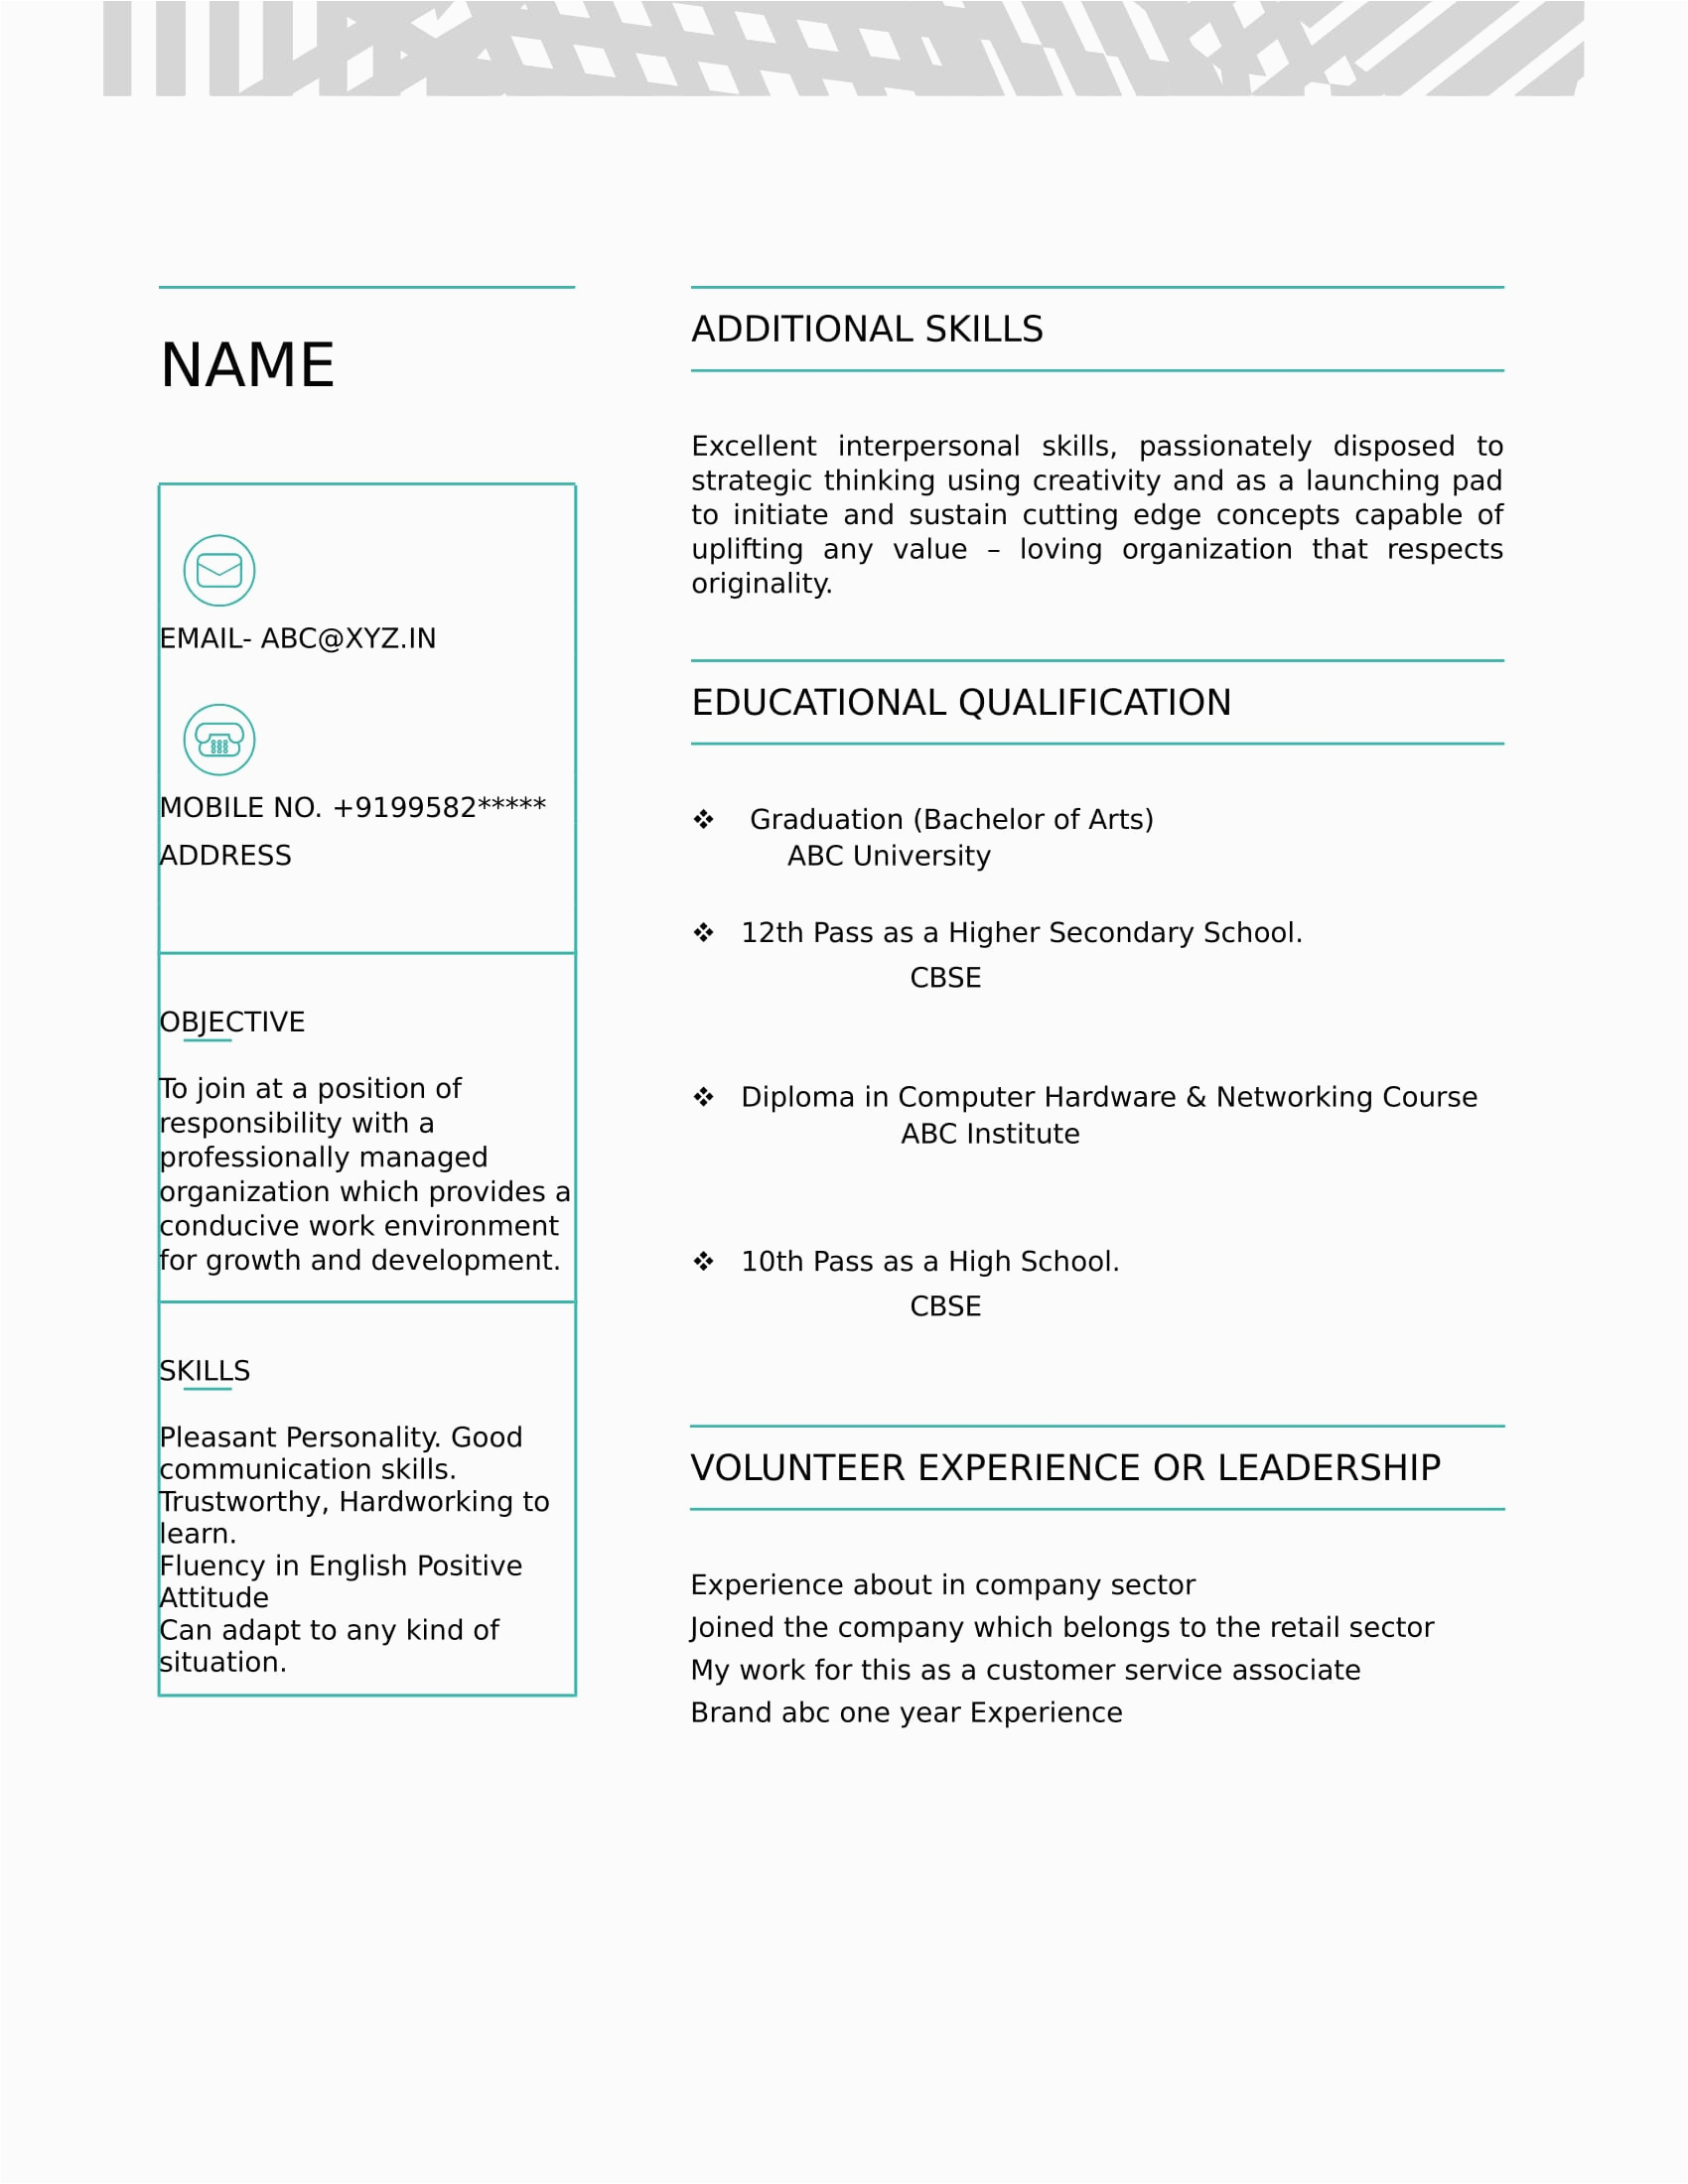 Sample Resume for Ba In It Resume Templates for Ba Freshers Download Free